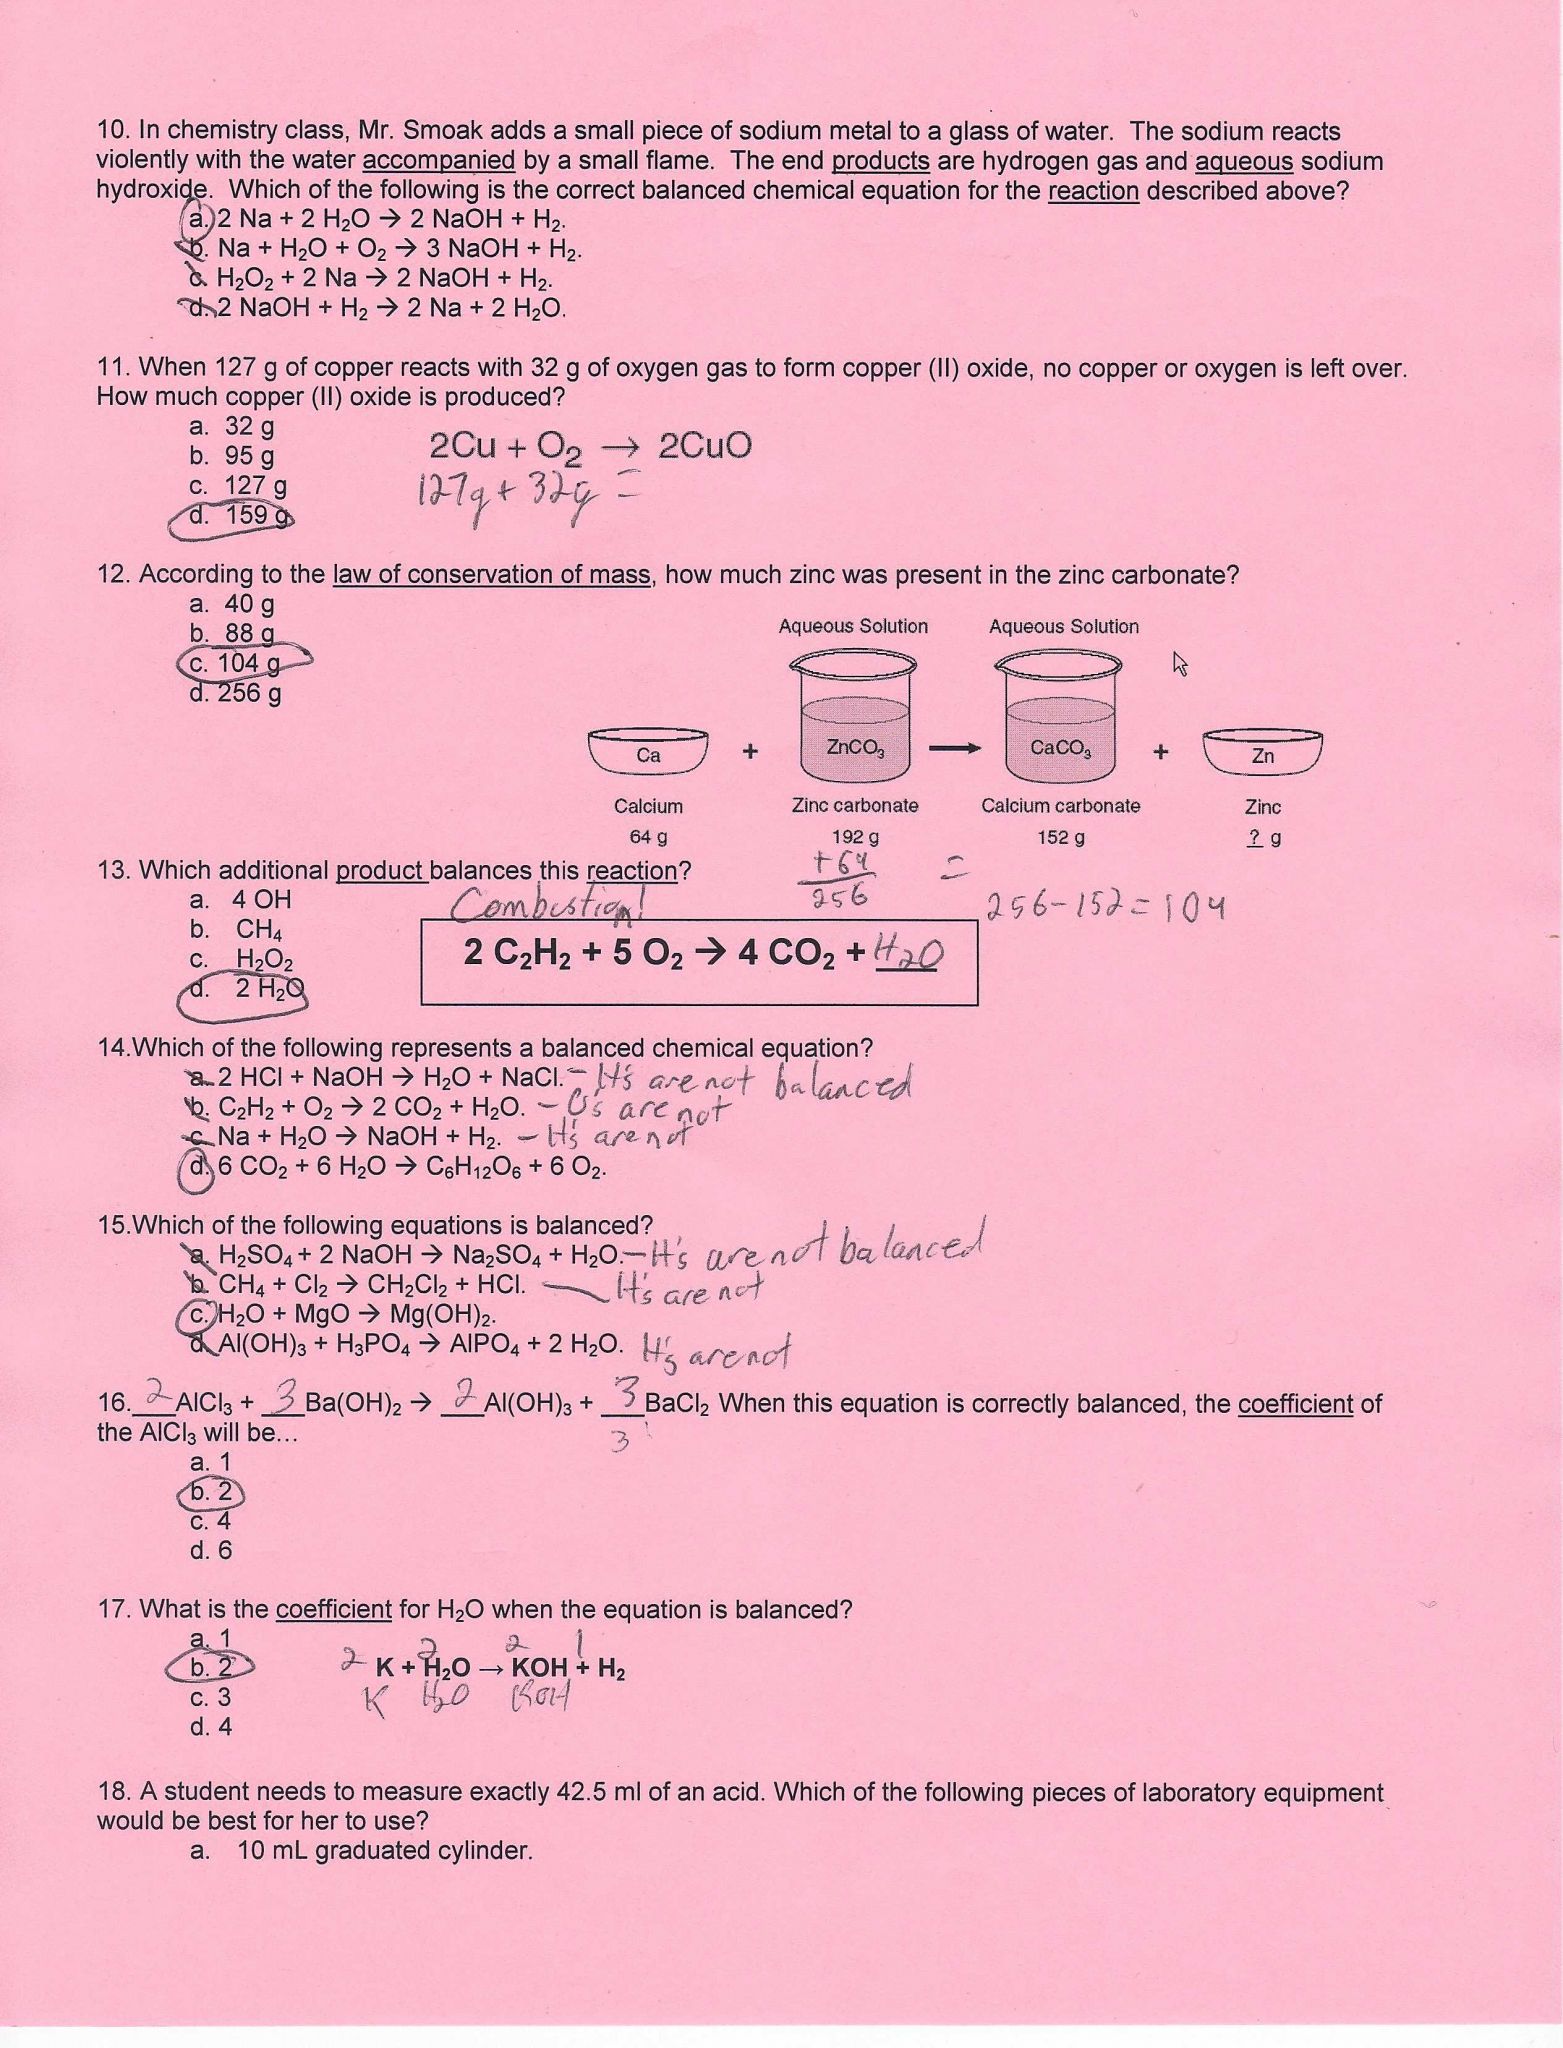 Ionic Compounds Worksheet Answers Also Ionic and Covalent Bonding Worksheet with Answers Bonding Basics